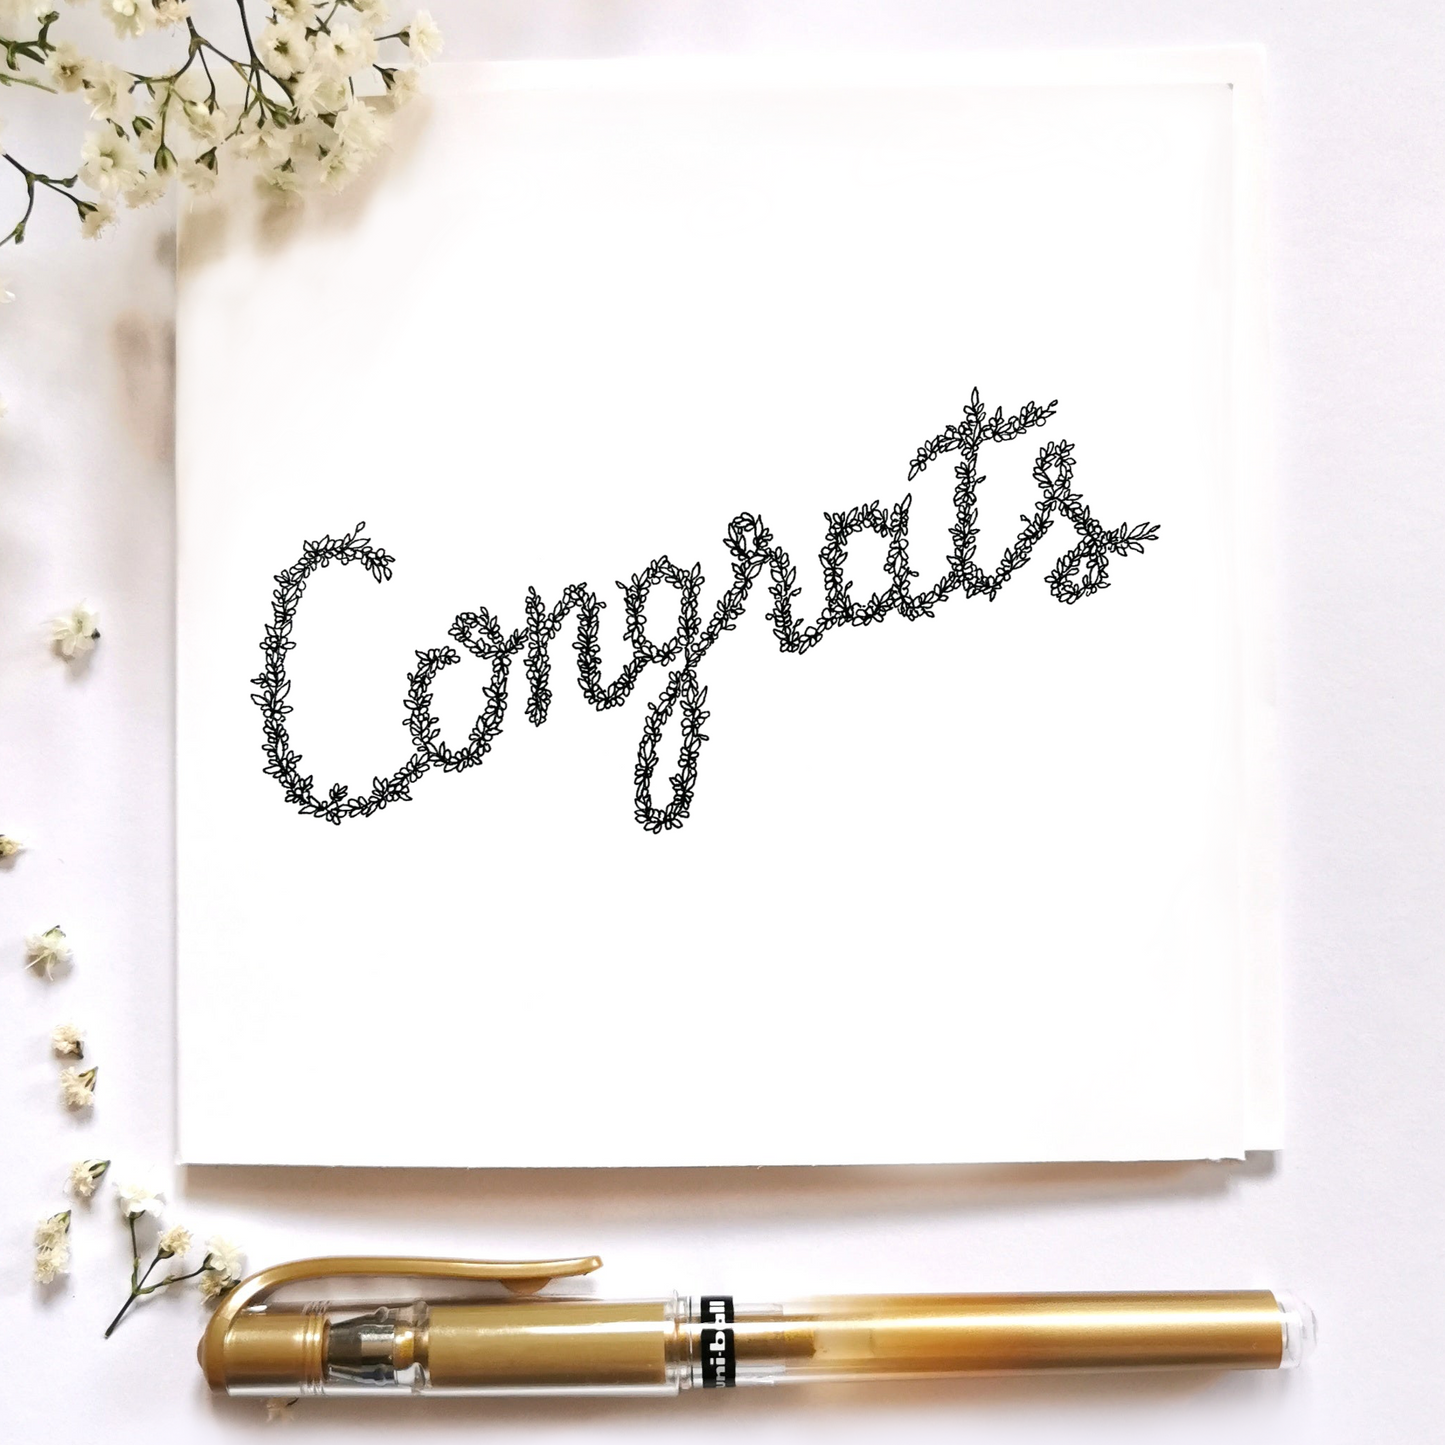 Image shows Illustration of the word Congrats drawn from floral drawings made entirely in black and white. at the bottom of the image is a gold pen and white floral arrangements to the left hand side of the image.